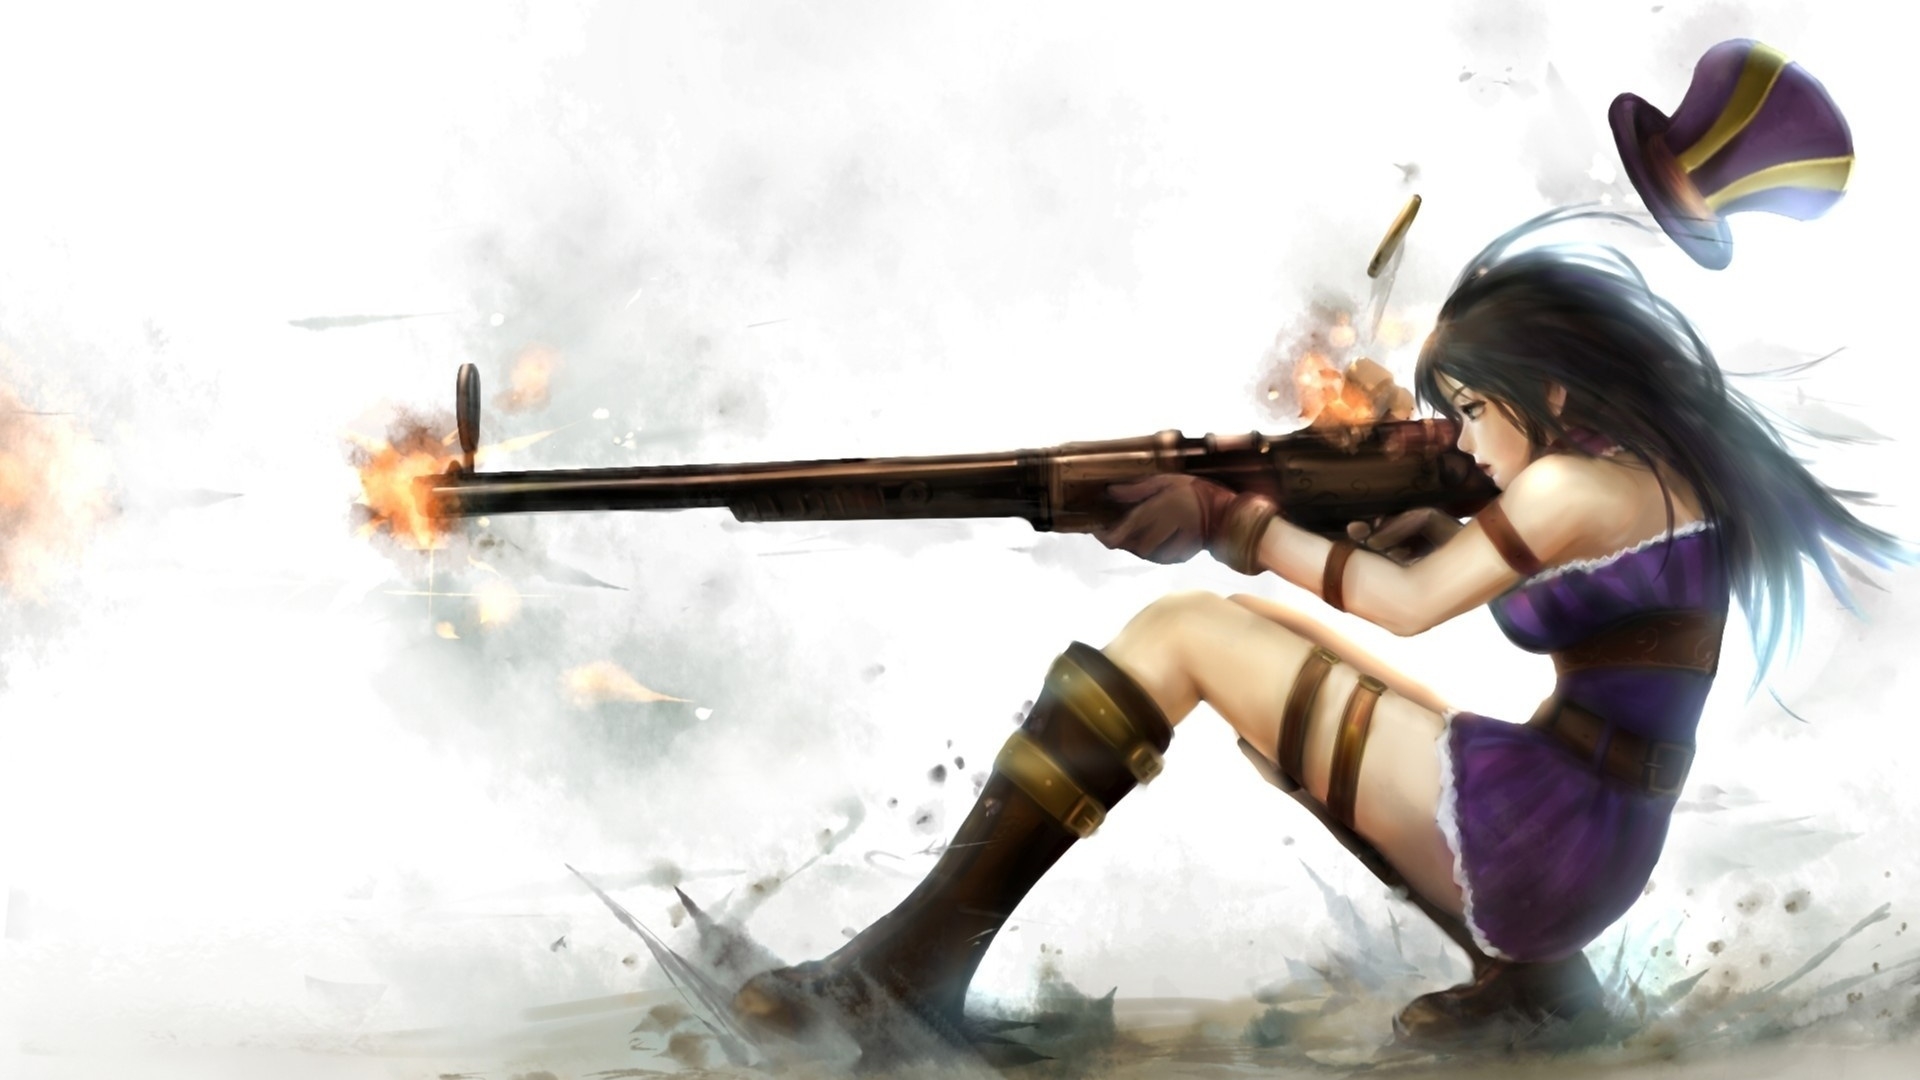 caitlyn wallpaper,cg artwork,action adventure game,black hair,anime,massively multiplayer online role playing game